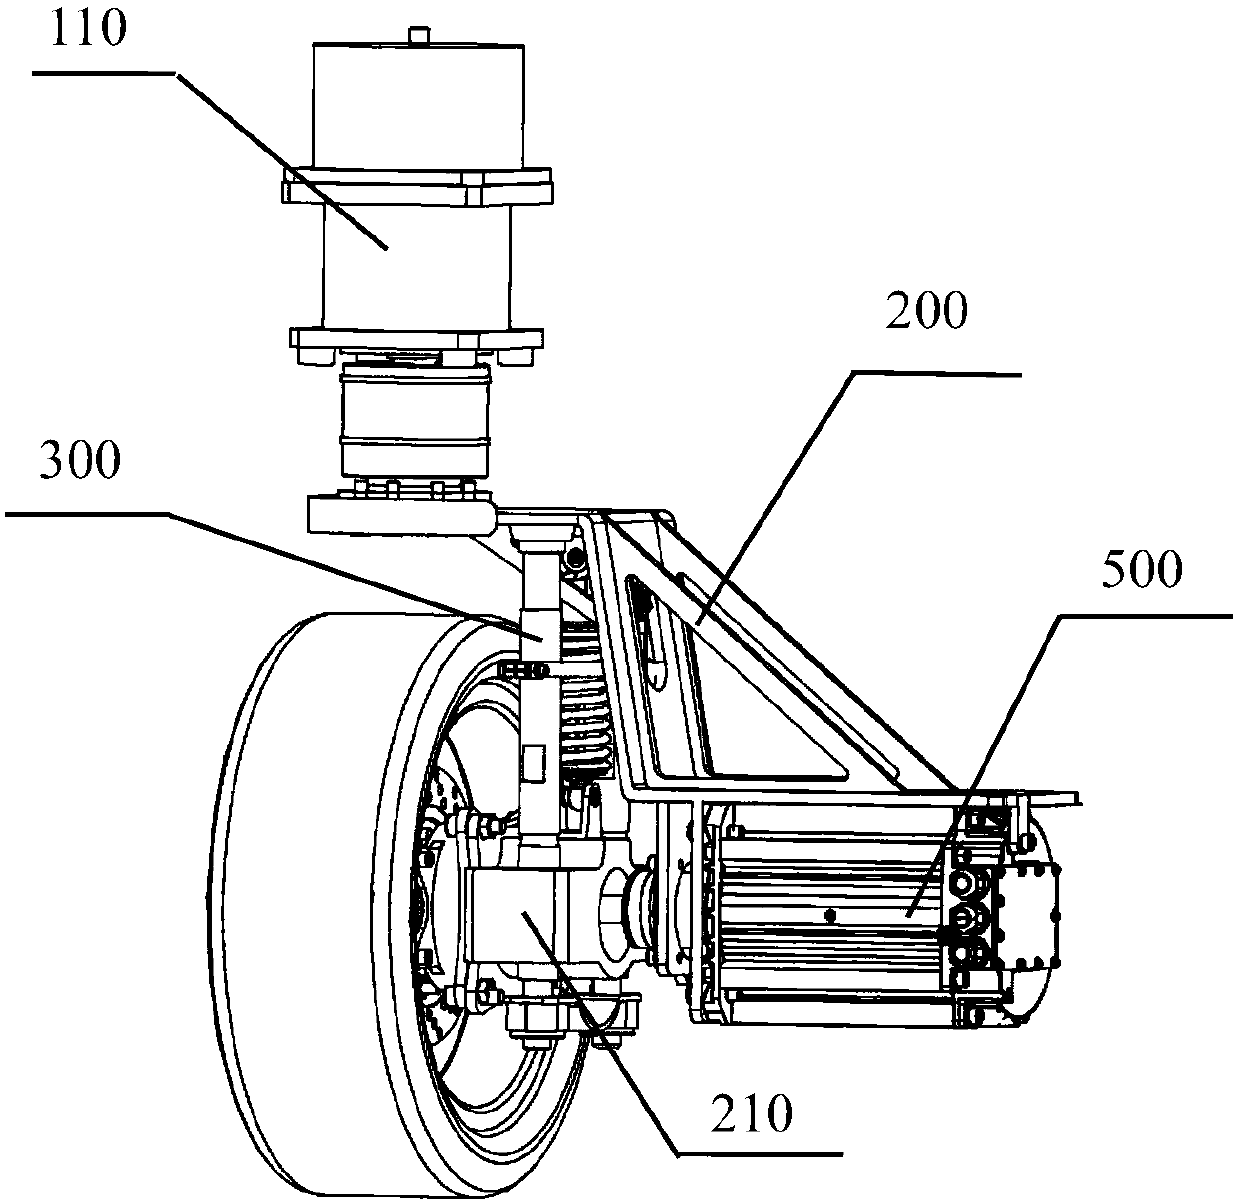 Electric vehicle chassis assembly with four-wheel wheel motor drive and four-wheel independent steering